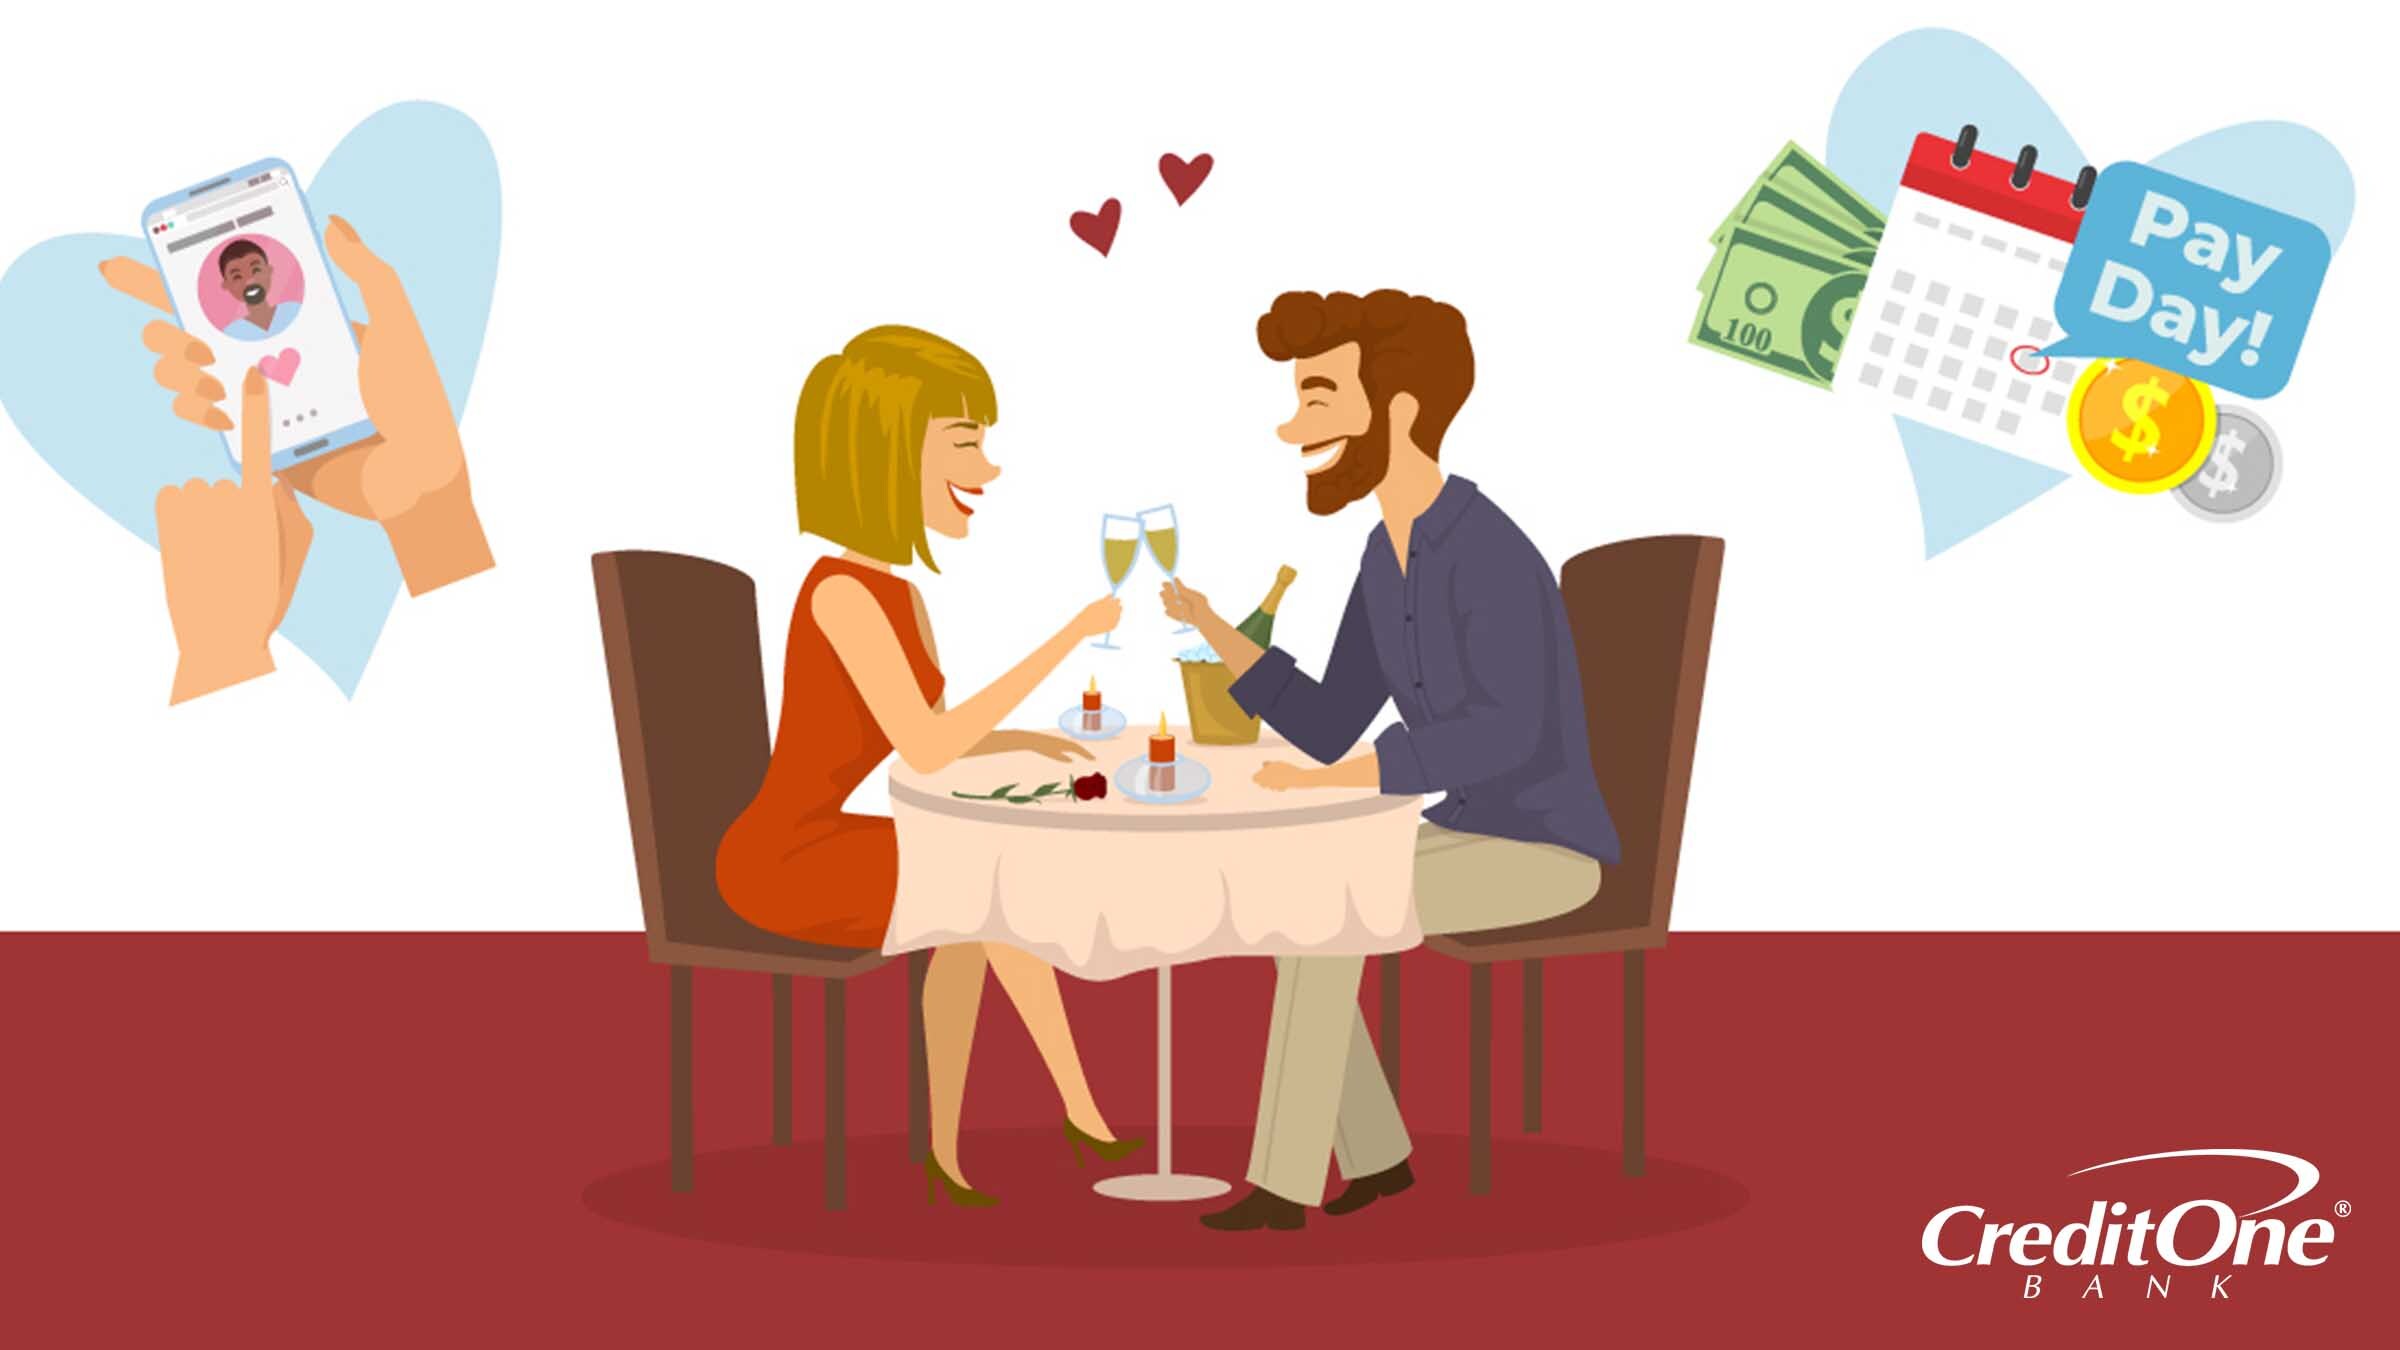 Infographic on credit cards and dating